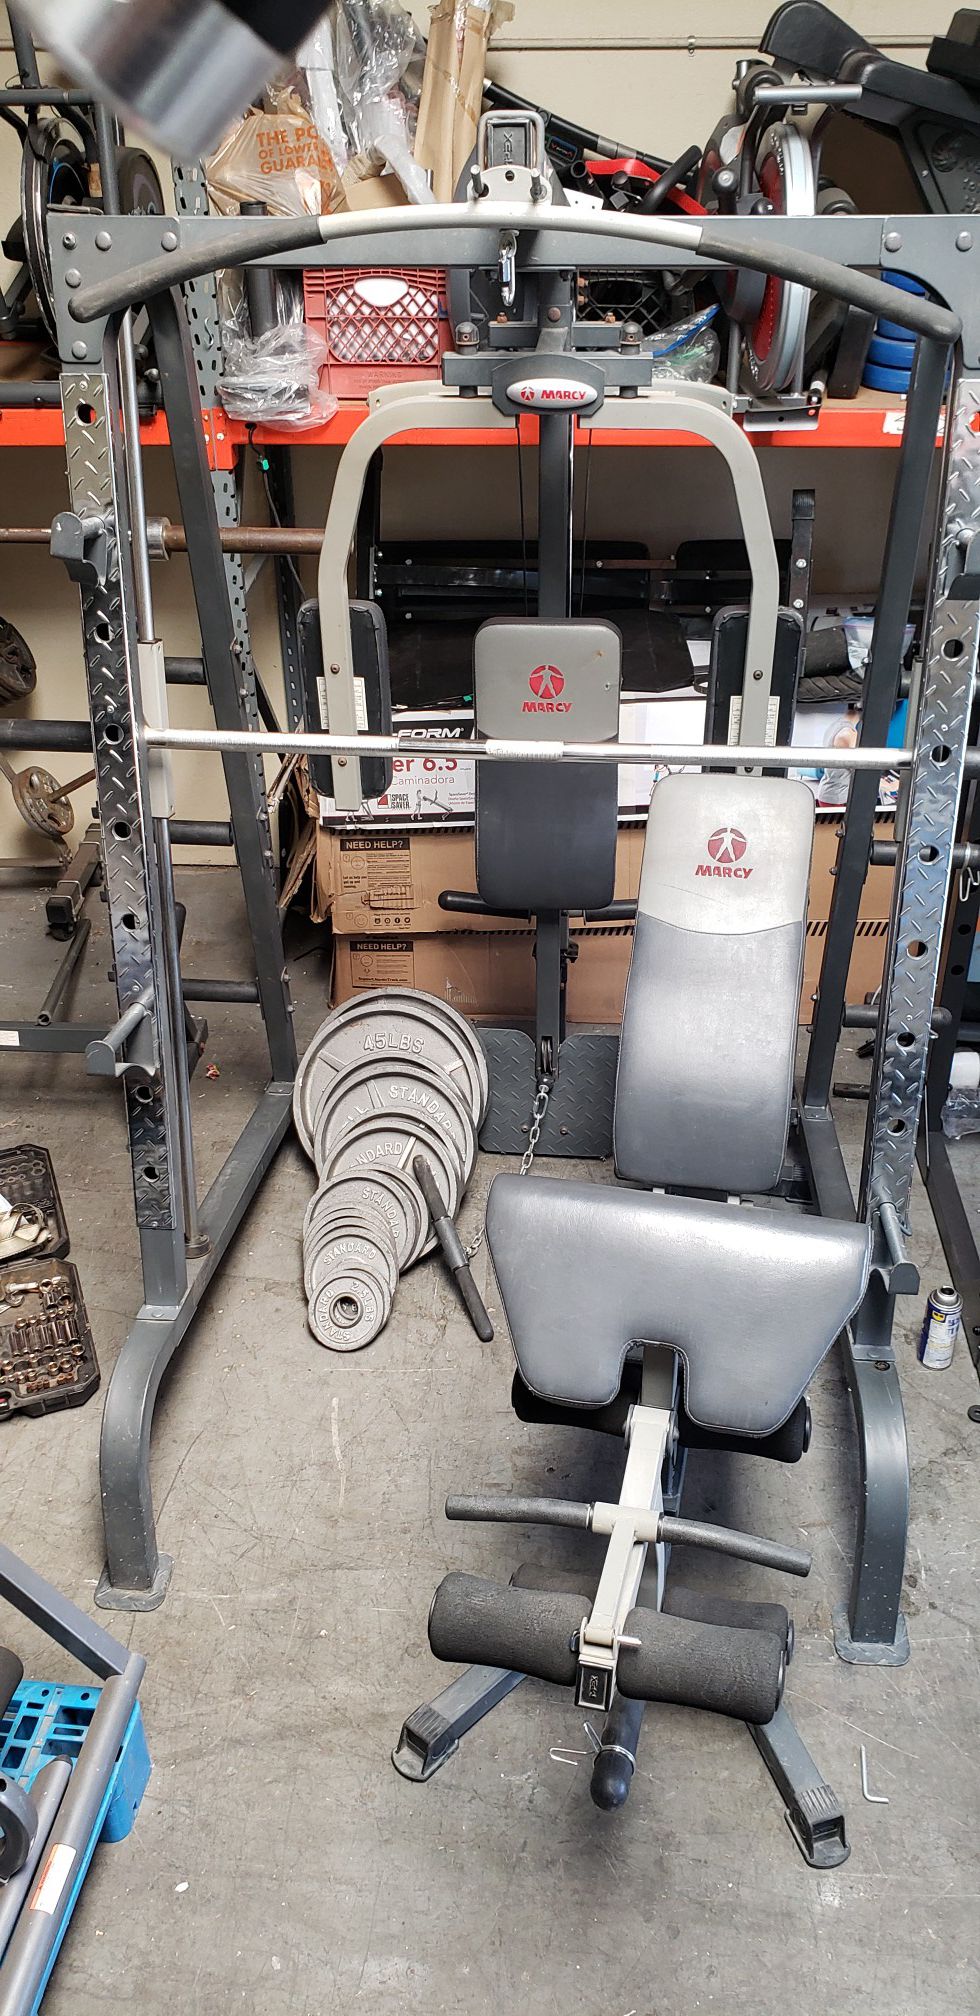 Smith machine with Olympic weights